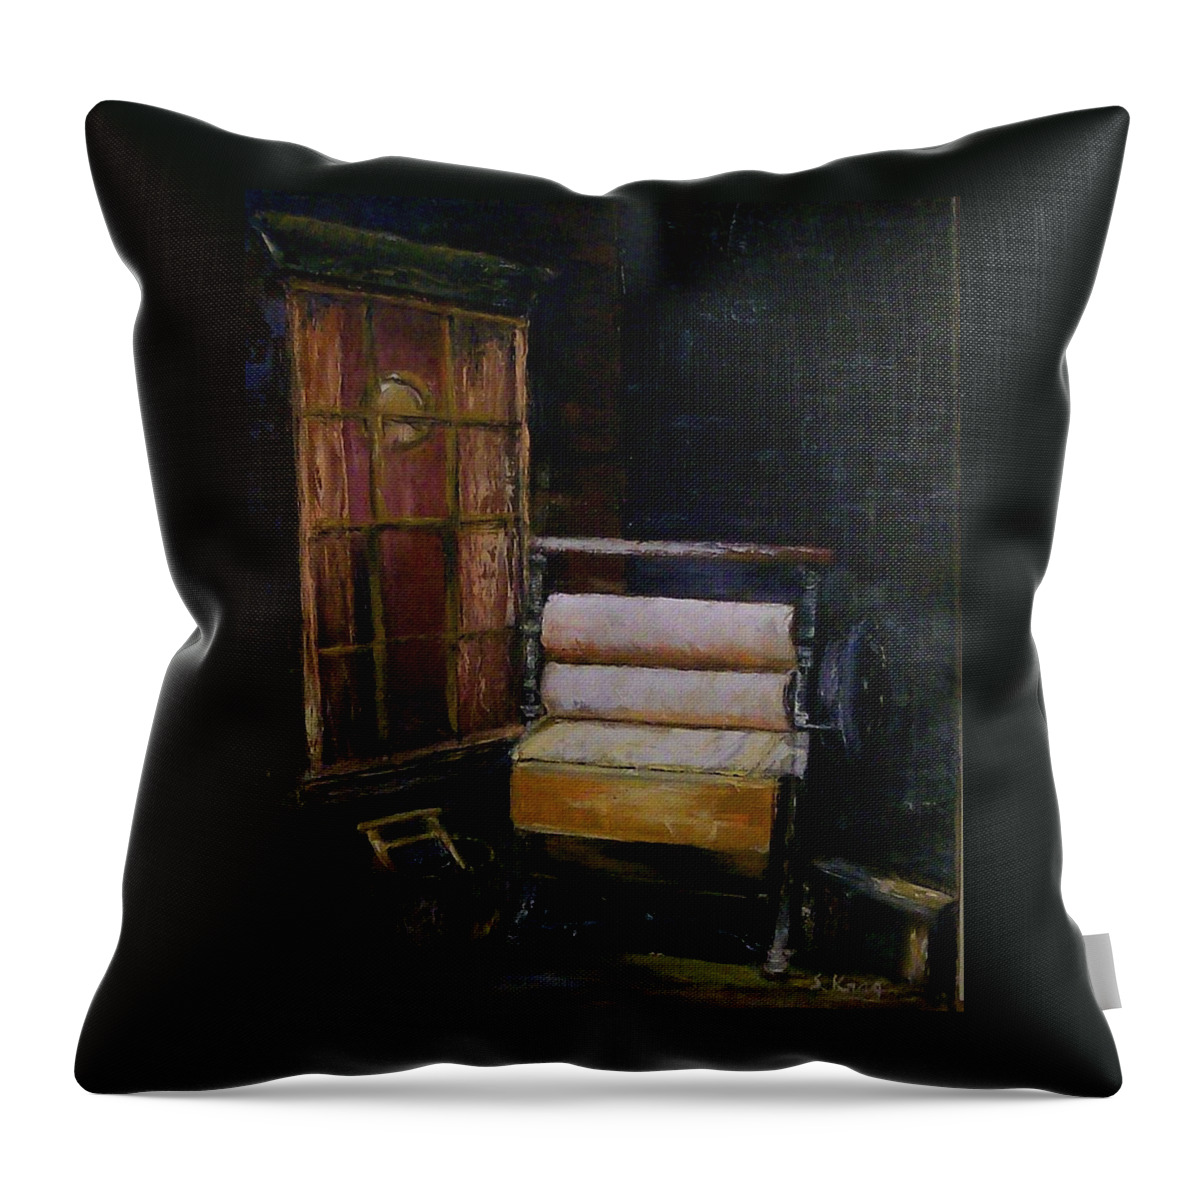 Still Life Throw Pillow featuring the painting Blue Monday by Stephen King